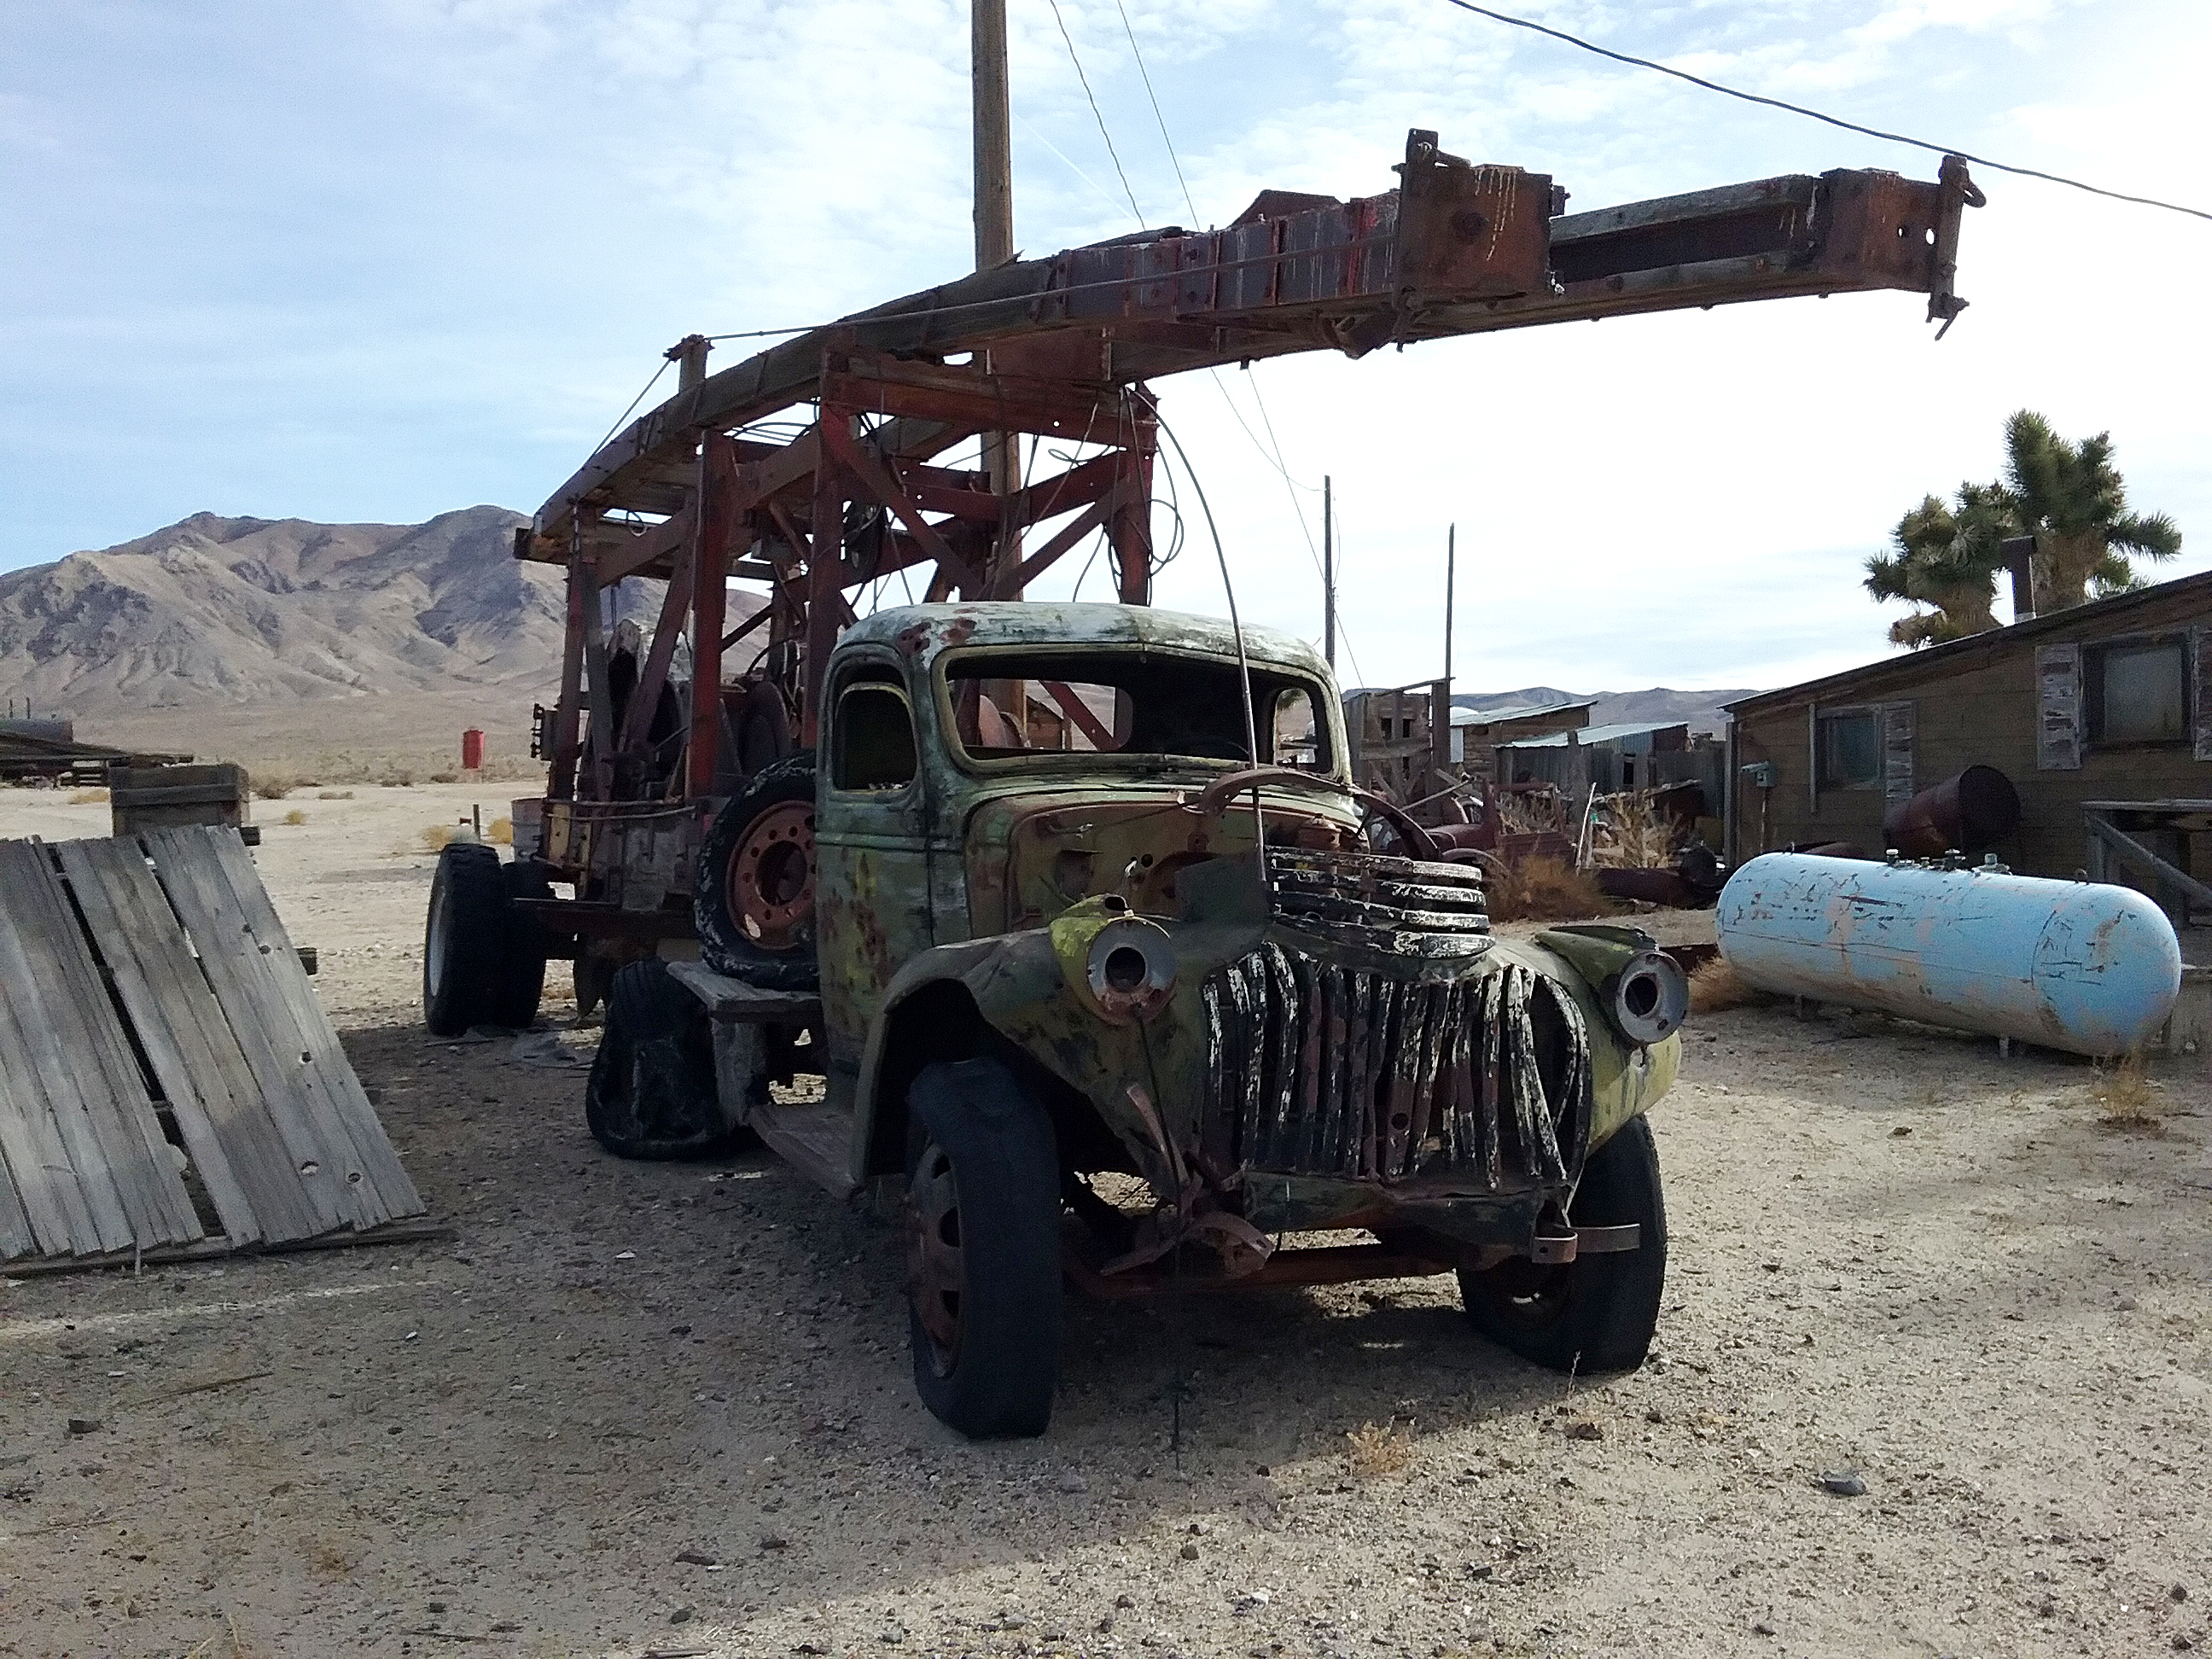 the ruined remains of an old mining truck in Gold Point, Nevada